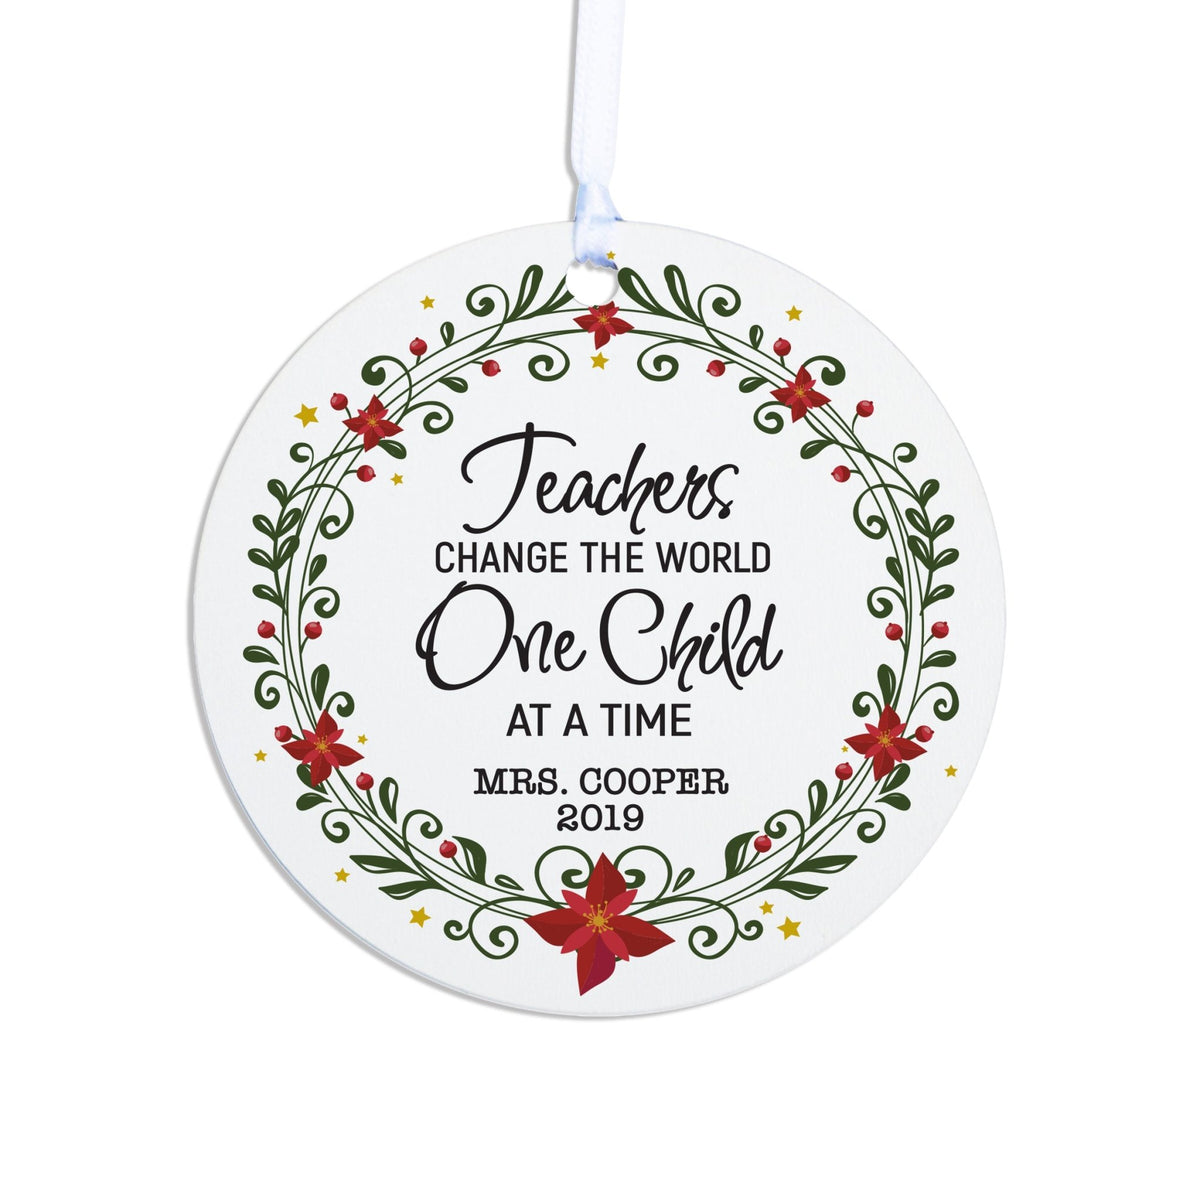 Personalized Round Christmas Ornament For Teachers Change The World - LifeSong Milestones